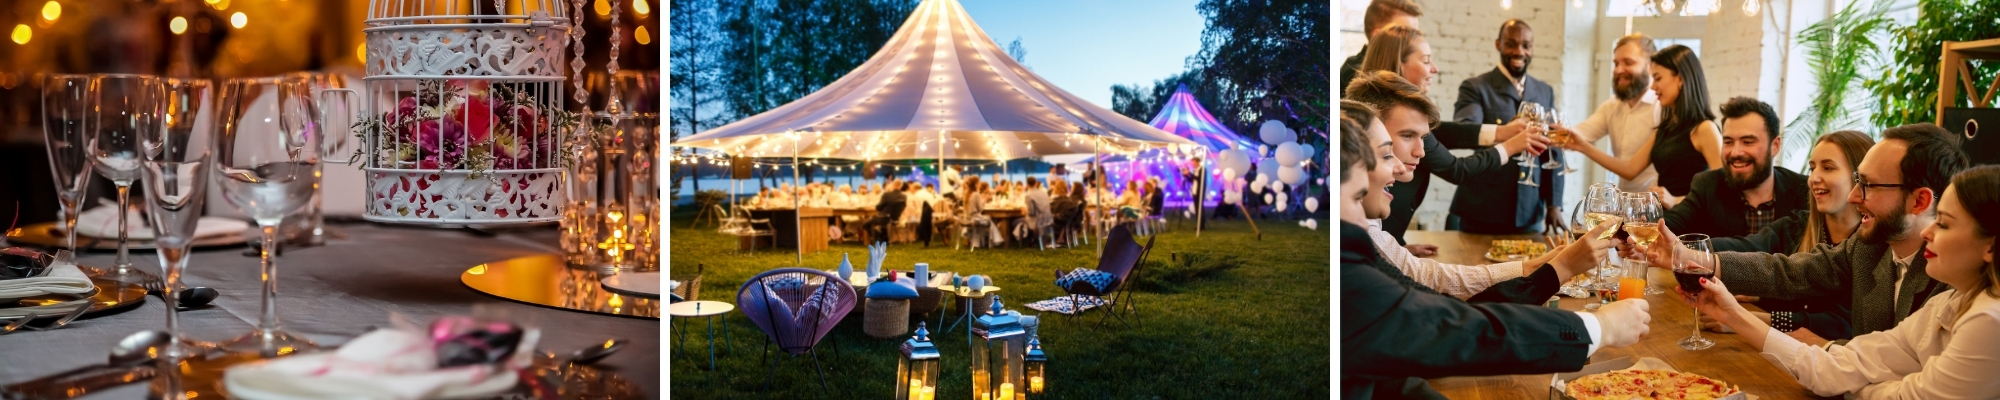 Party & Event Rental Business Financing